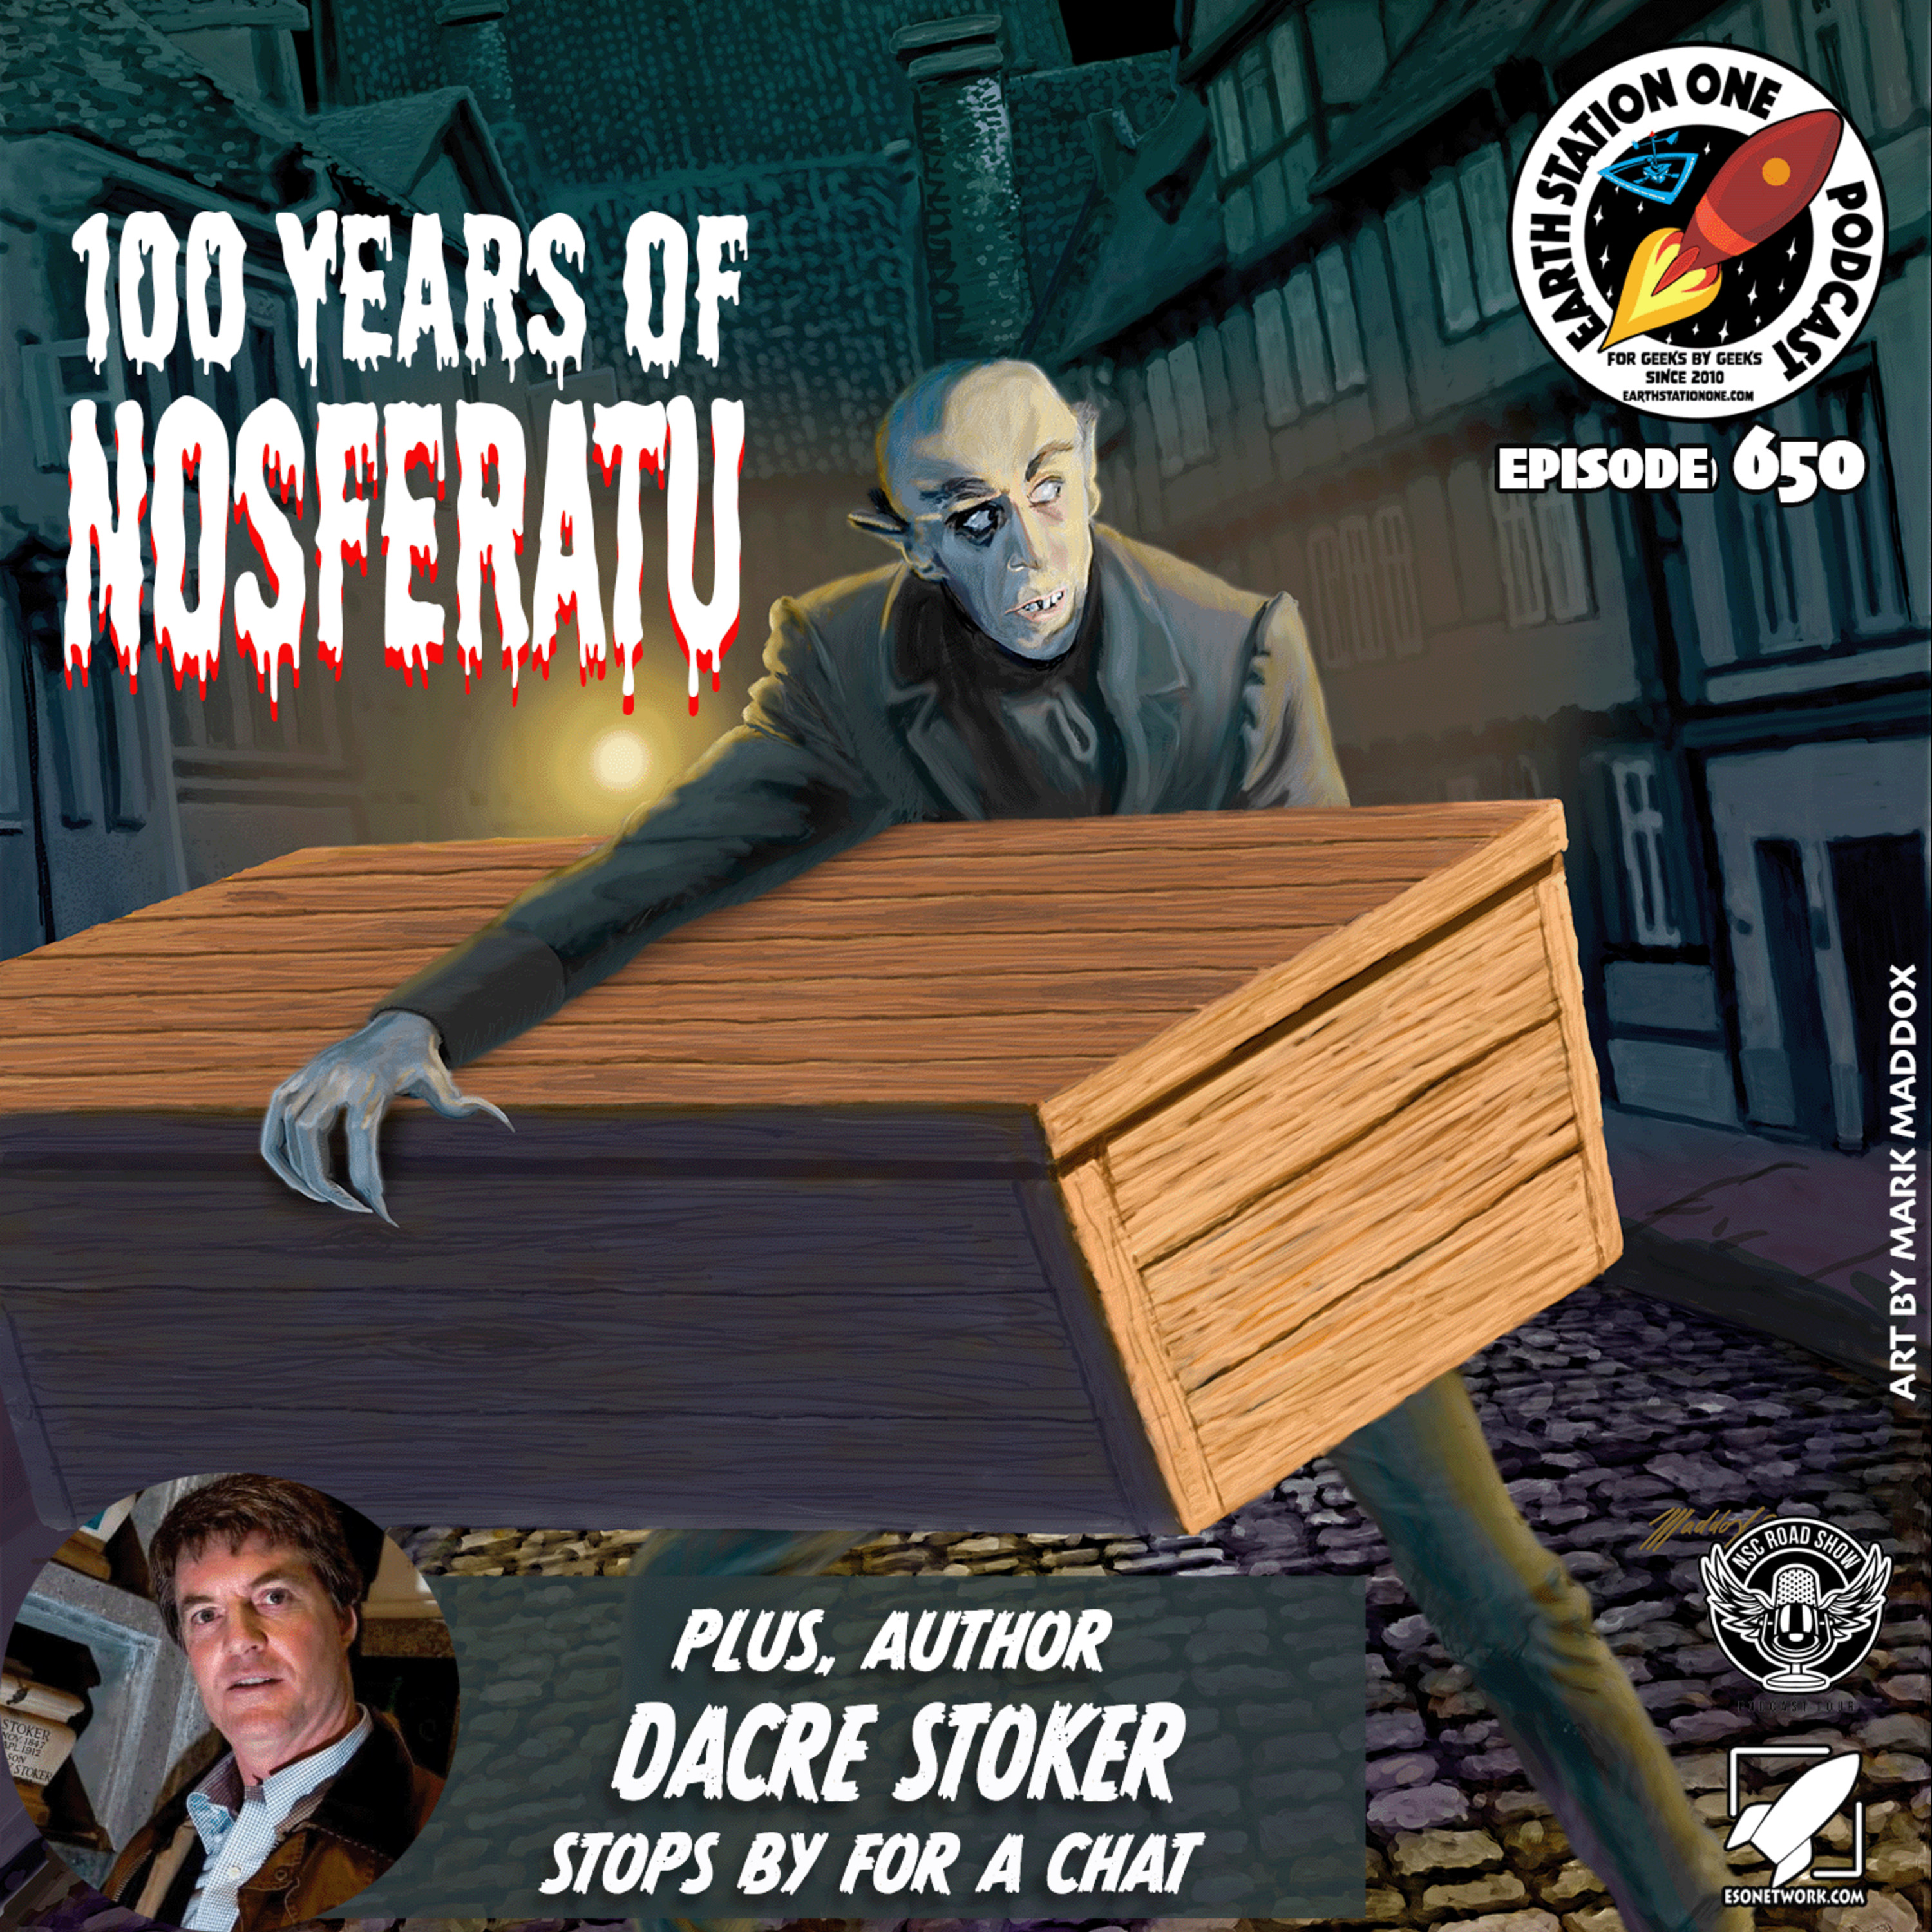 The Earth Station One Podcast - 100th Anniversary of Nosferatu